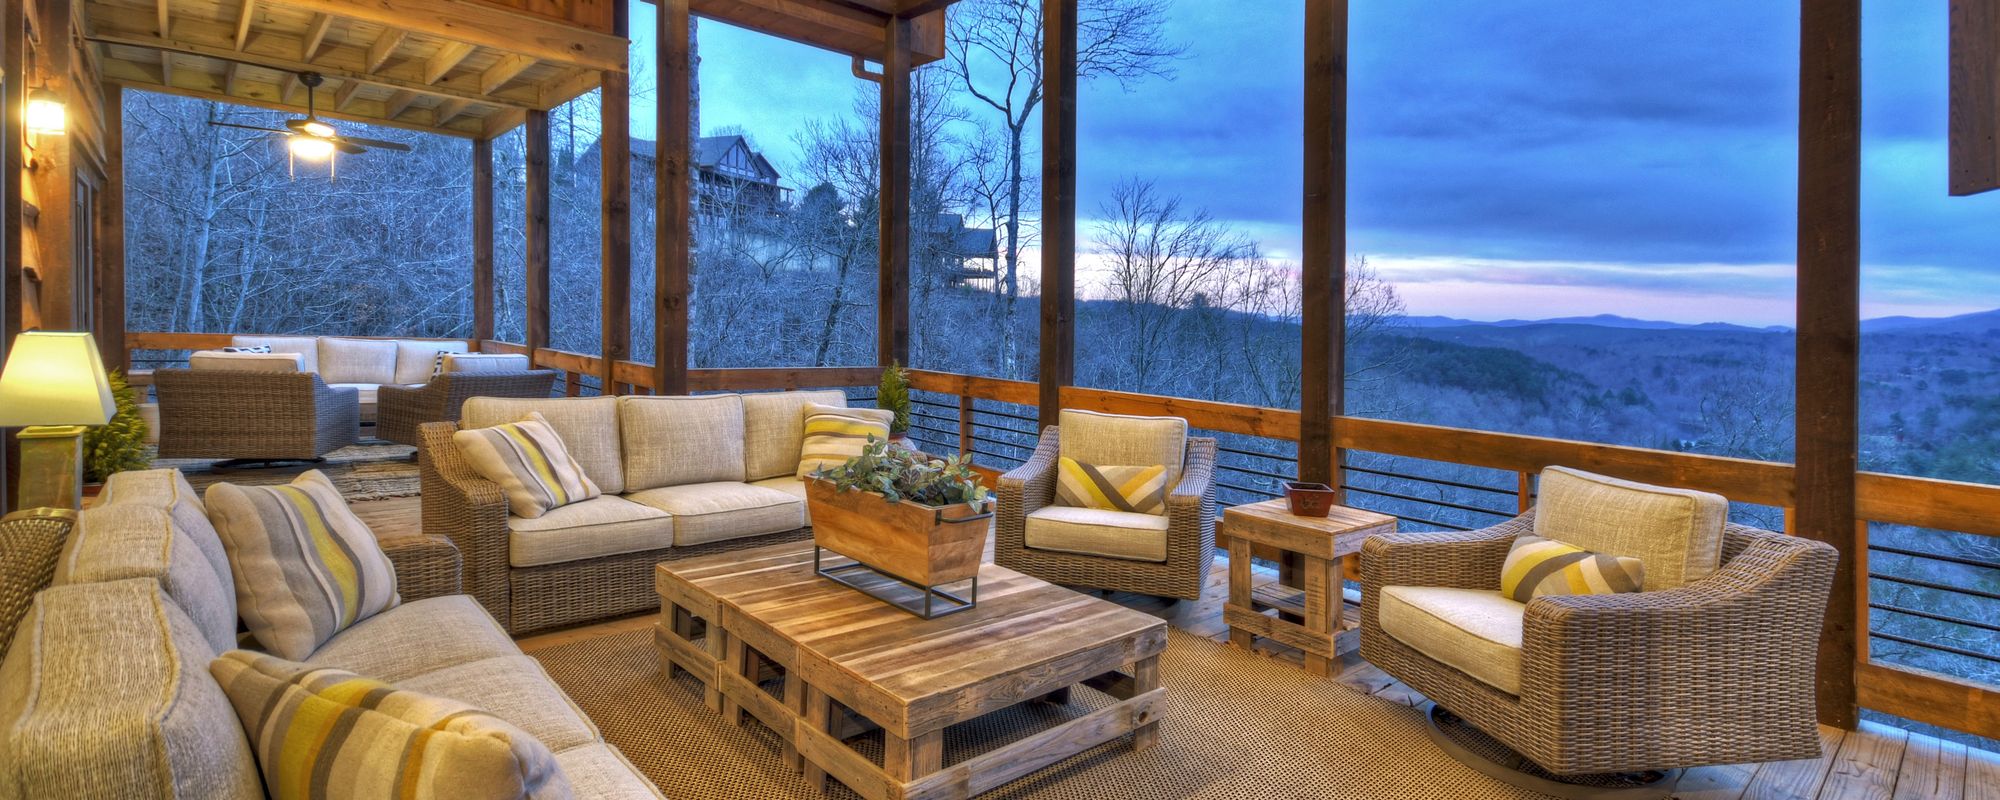 Dusk views from outdoor living space at Blue Ridge vacation rental